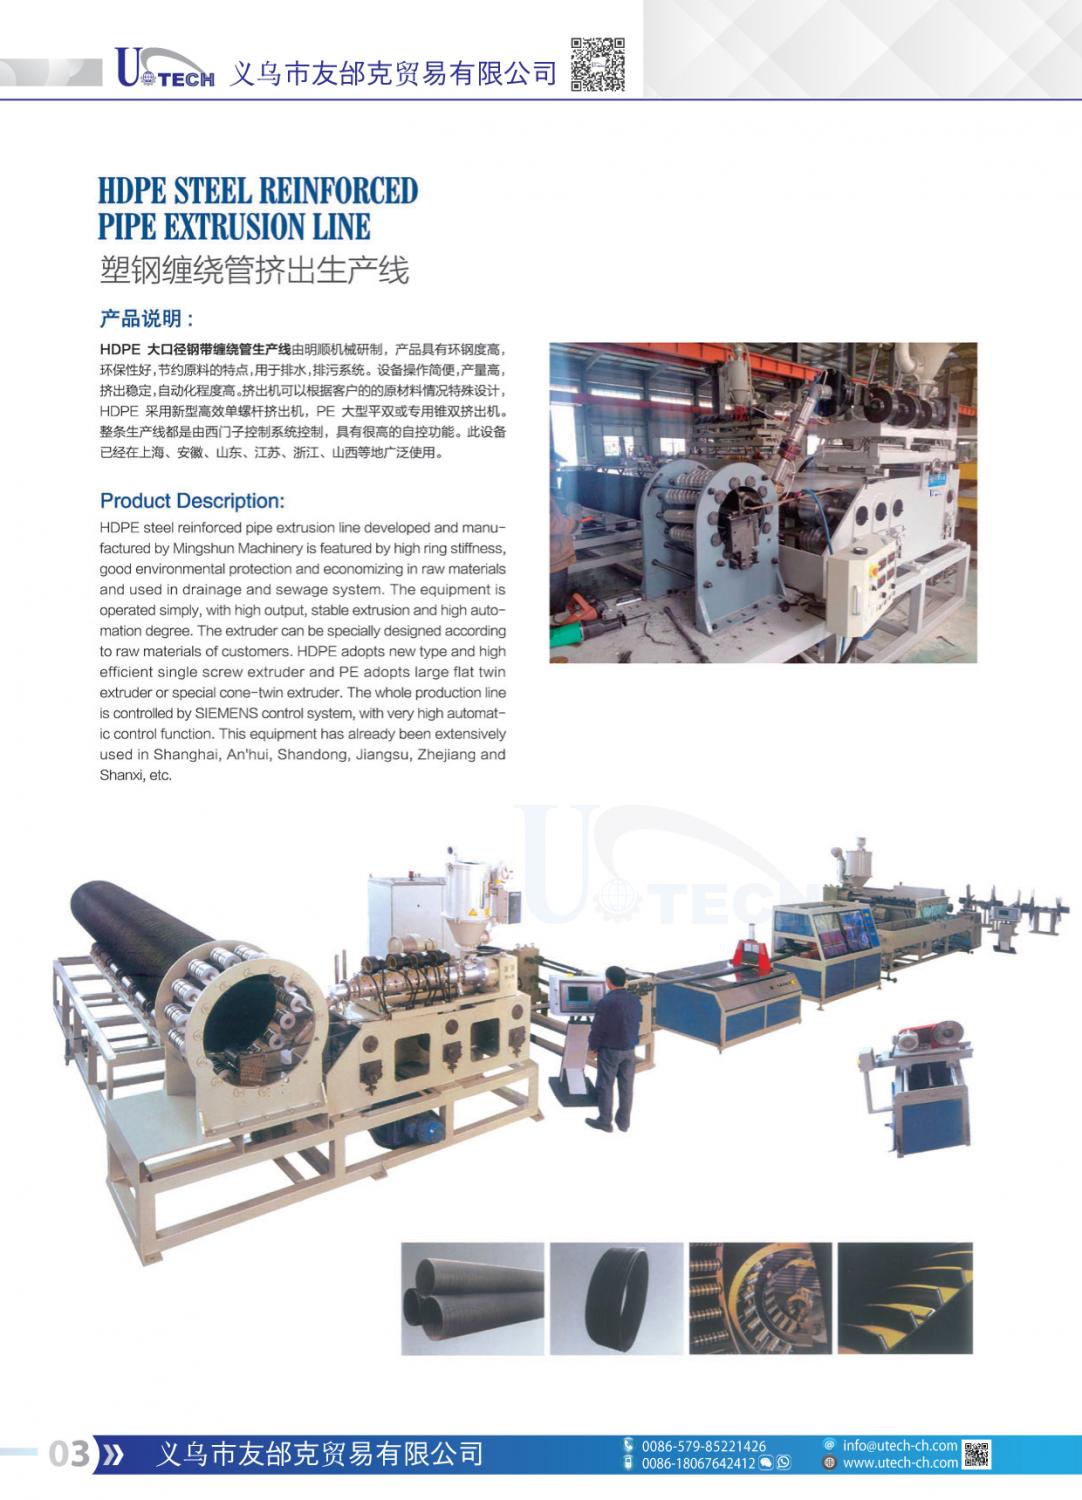 HDPE STEEL REINFORCED PIPE EXTRUSION LINE